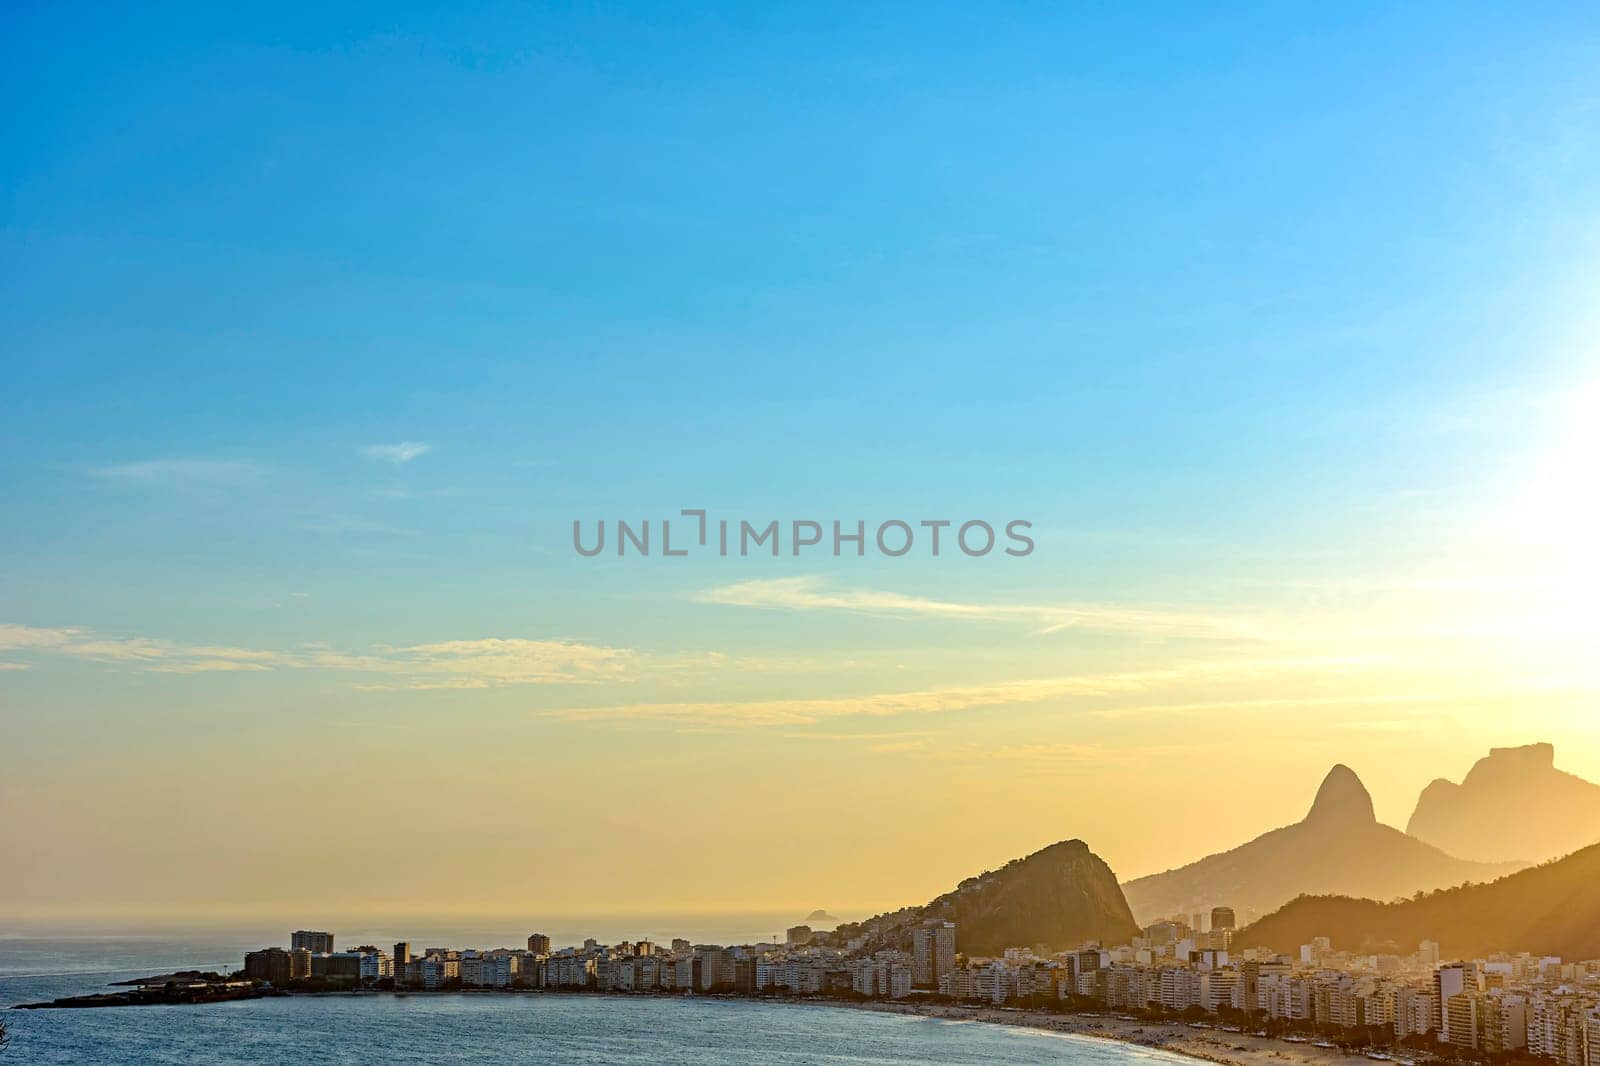 Copacabana Beach, its buildings and the mountains by Fred_Pinheiro